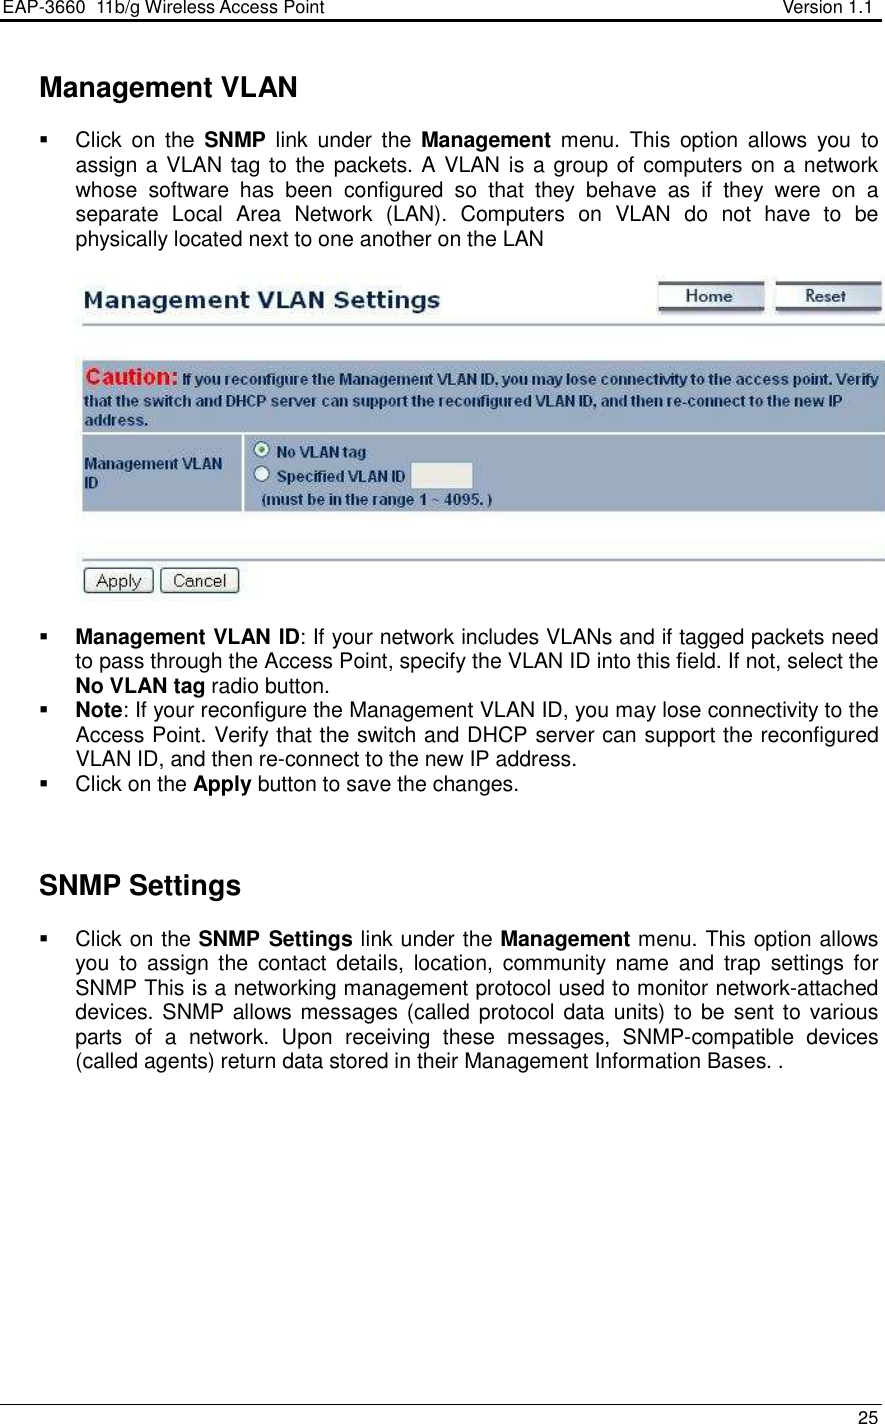 EAP-3660  11b/g Wireless Access Point                                                           Version 1.1    25    Management VLAN   Click  on  the  SNMP  link  under the  Management  menu.  This  option  allows  you  to assign a VLAN tag to the packets. A VLAN is a group of computers on a network whose  software  has  been  configured  so  that  they  behave  as  if  they  were  on  a separate  Local  Area  Network  (LAN).  Computers  on  VLAN  do  not  have  to  be physically located next to one another on the LAN     Management VLAN ID: If your network includes VLANs and if tagged packets need to pass through the Access Point, specify the VLAN ID into this field. If not, select the No VLAN tag radio button.   Note: If your reconfigure the Management VLAN ID, you may lose connectivity to the Access Point. Verify that the switch and DHCP server can support the reconfigured VLAN ID, and then re-connect to the new IP address.   Click on the Apply button to save the changes.       SNMP Settings   Click on the SNMP Settings link under the Management menu. This option allows you  to  assign  the  contact  details,  location,  community  name  and  trap  settings  for SNMP This is a networking management protocol used to monitor network-attached devices. SNMP allows messages (called protocol data units) to  be sent to  various parts  of  a  network.  Upon  receiving  these  messages,  SNMP-compatible  devices (called agents) return data stored in their Management Information Bases. . 